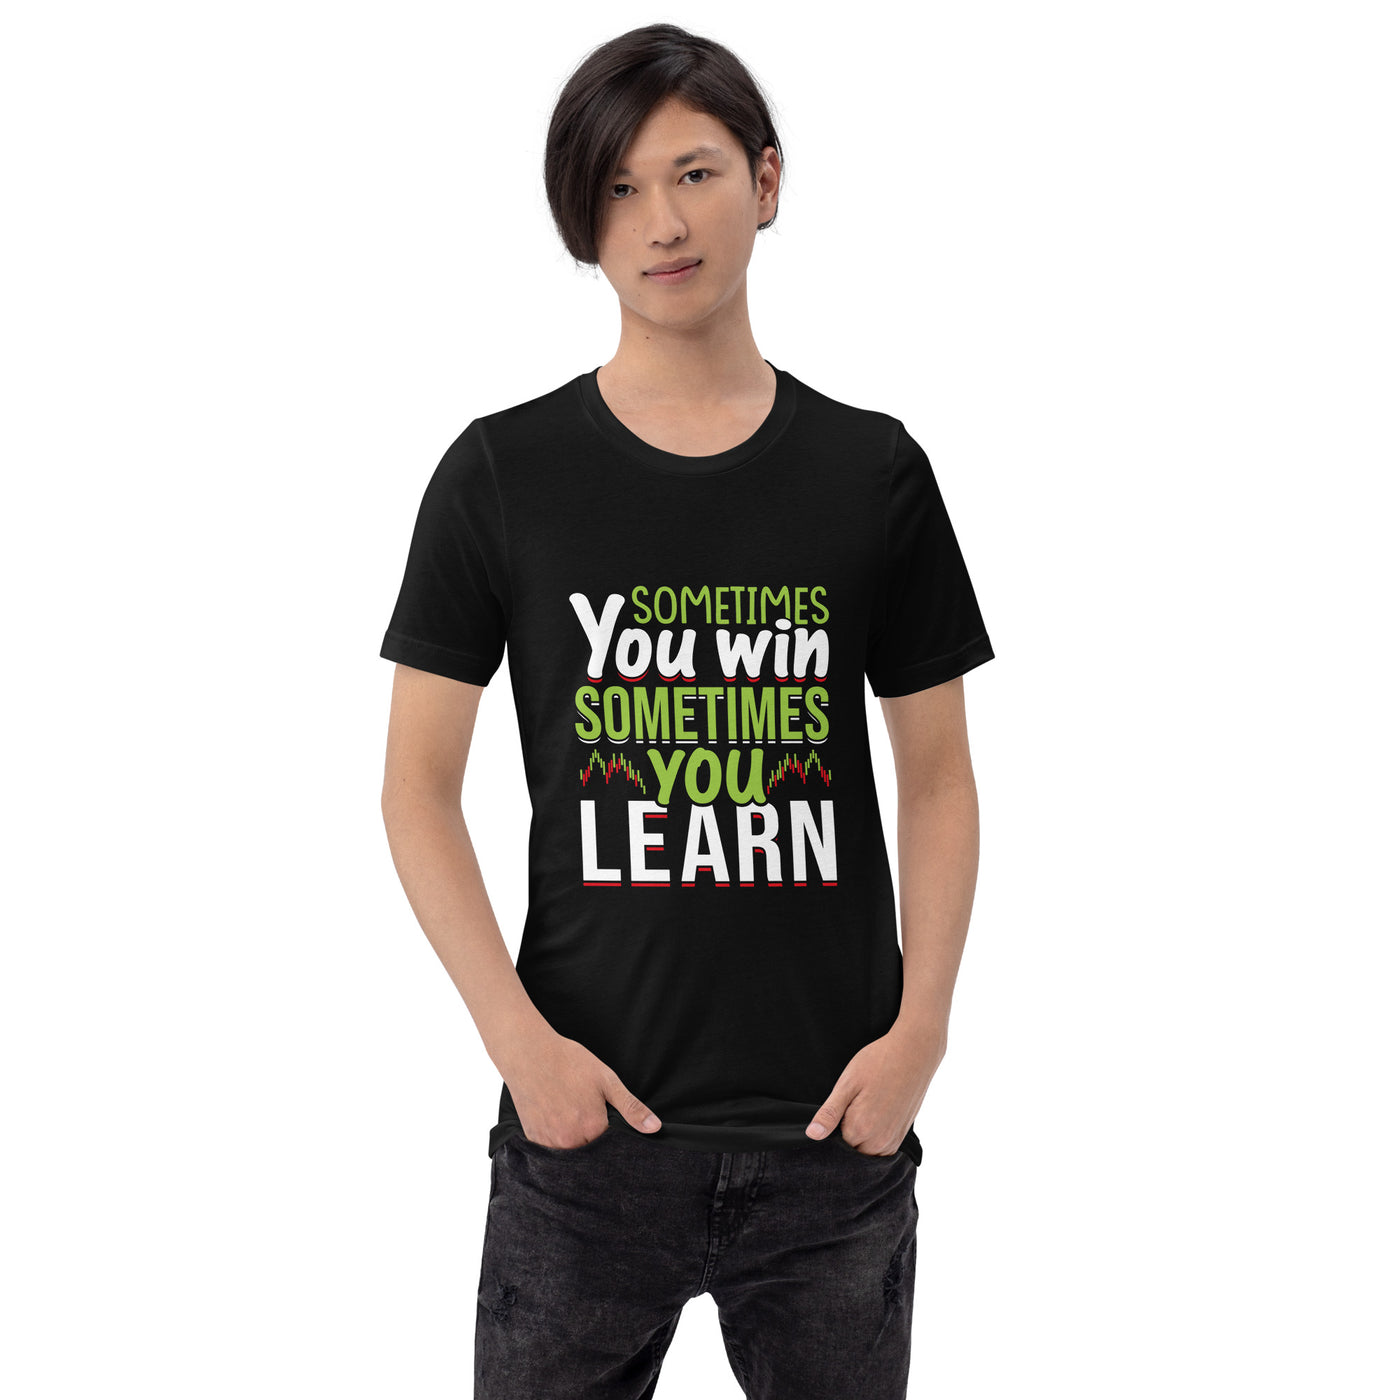 Sometimes you Win, sometimes you Learn - Unisex t-shirt